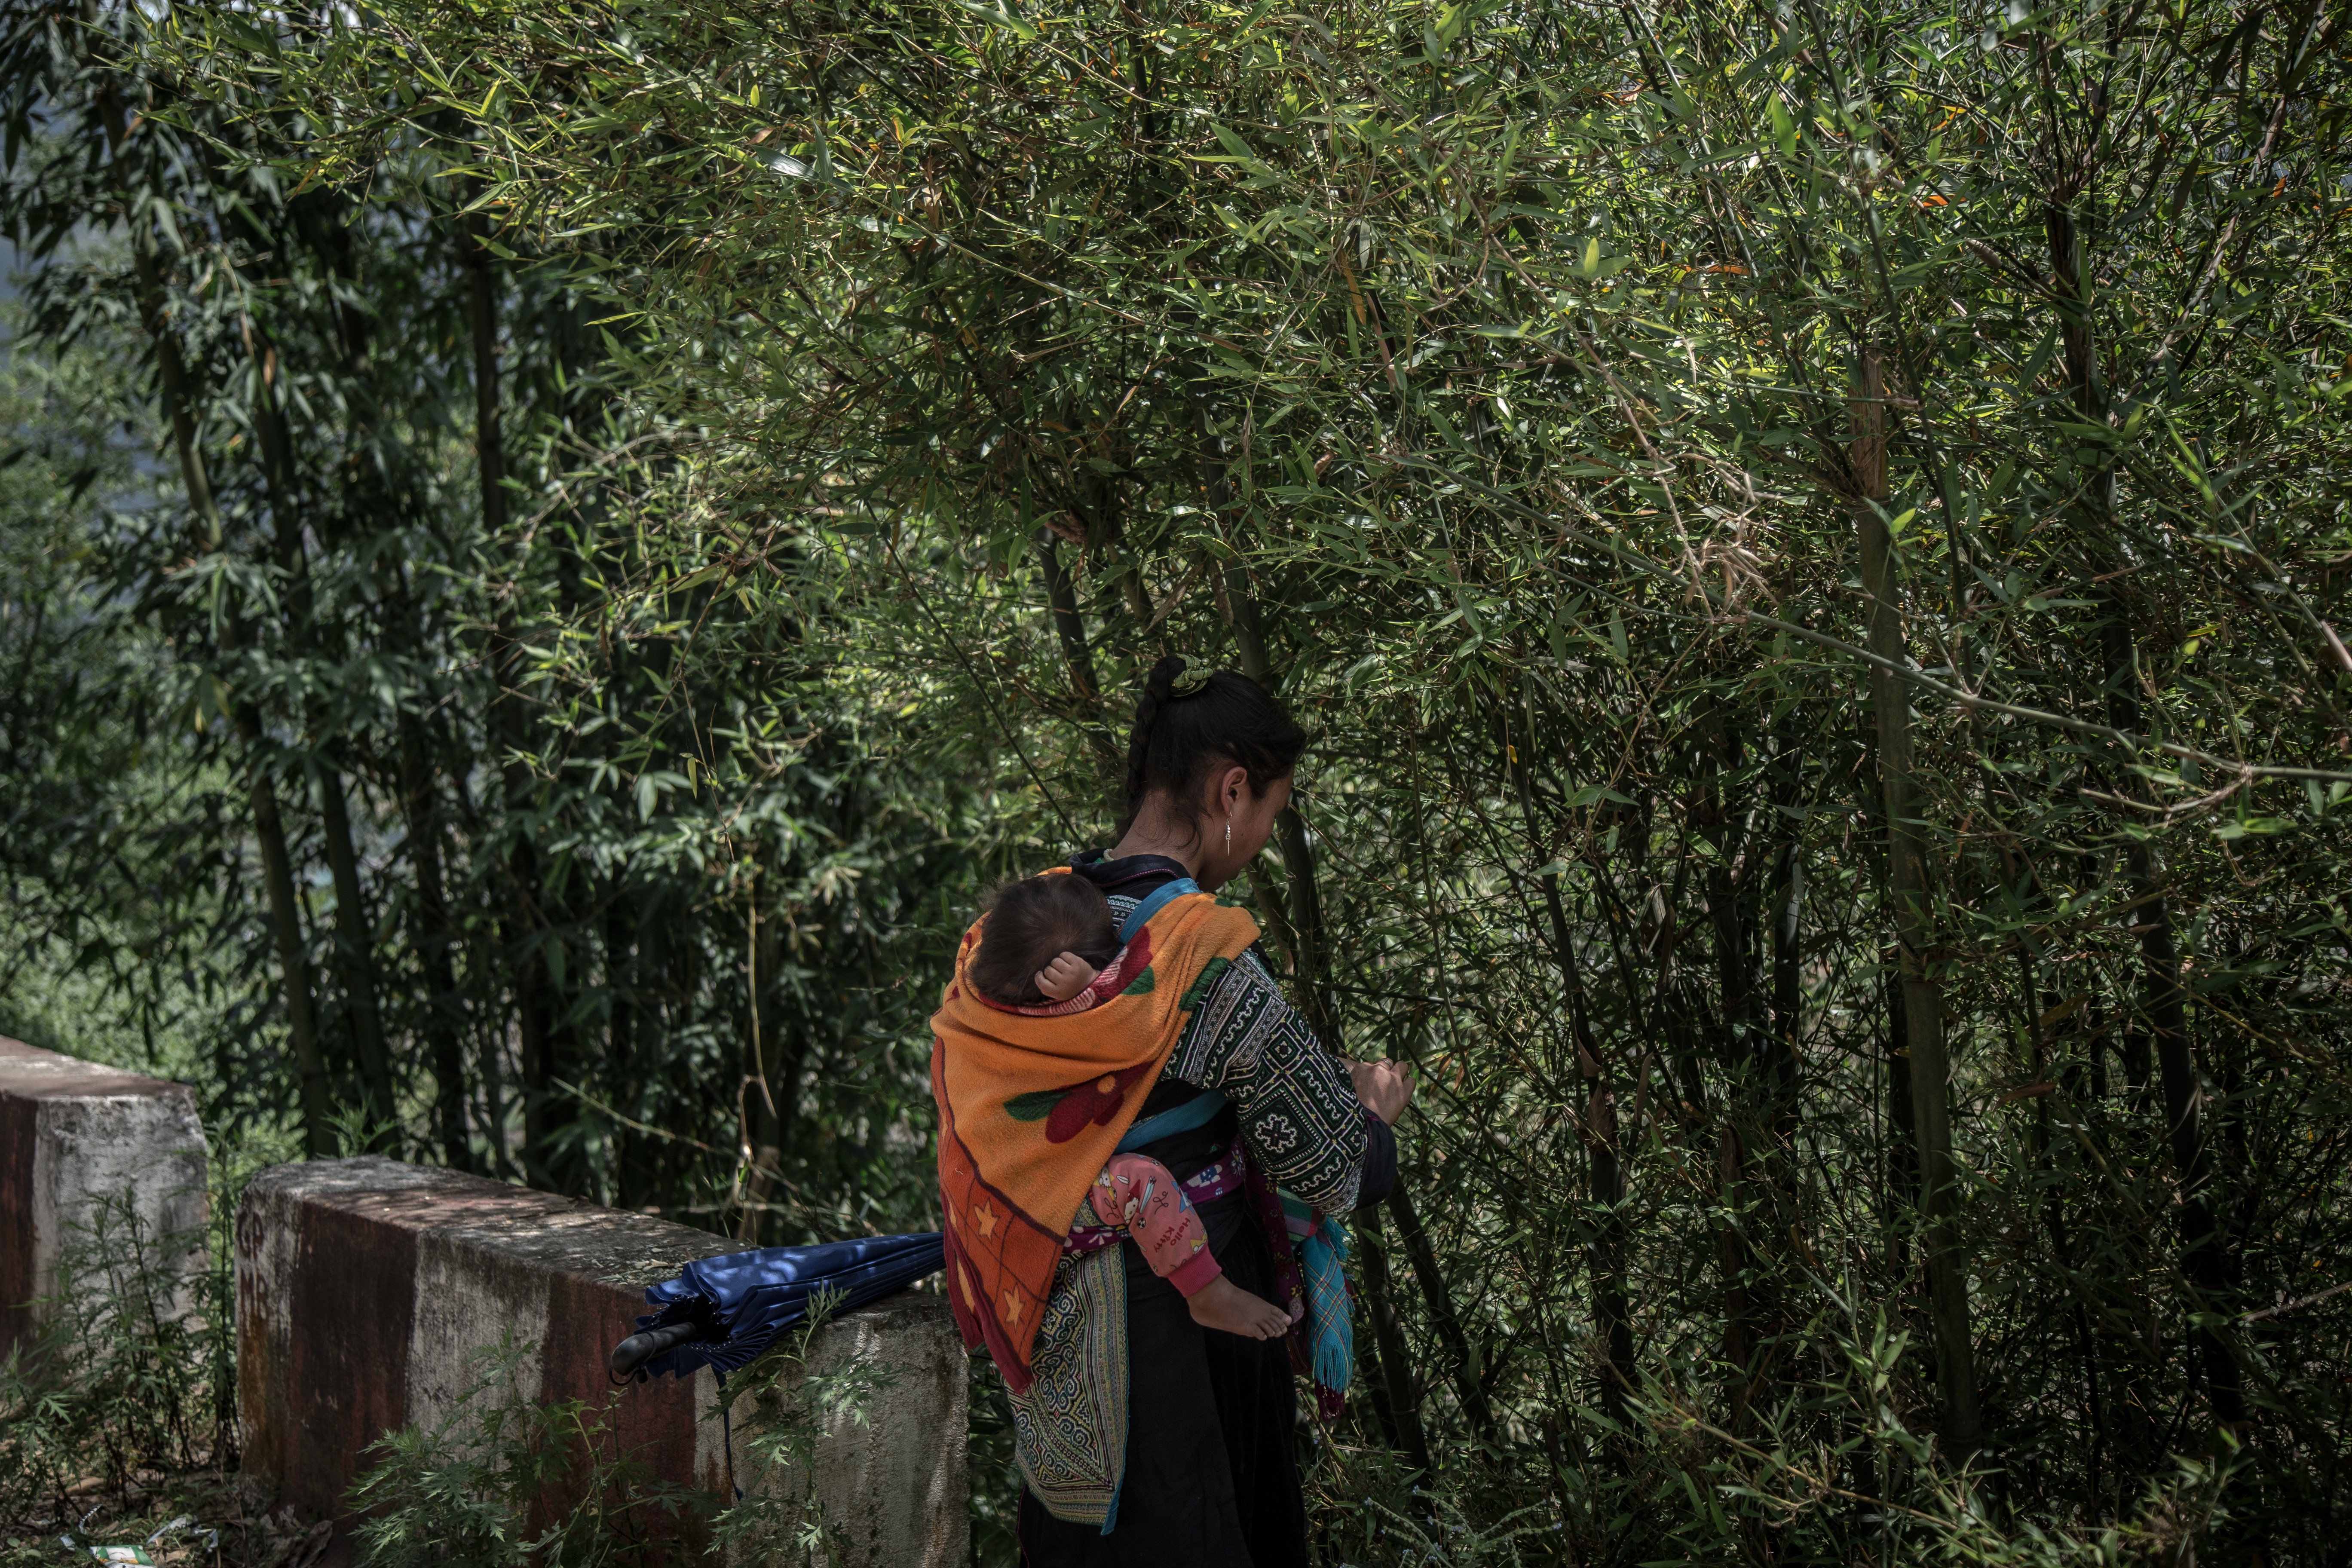 In the rural mountains of Vietnam, young girls are disappearing from their homes with increasing regularity. Many turn up across the border, sold as wives for the price of a buffalo